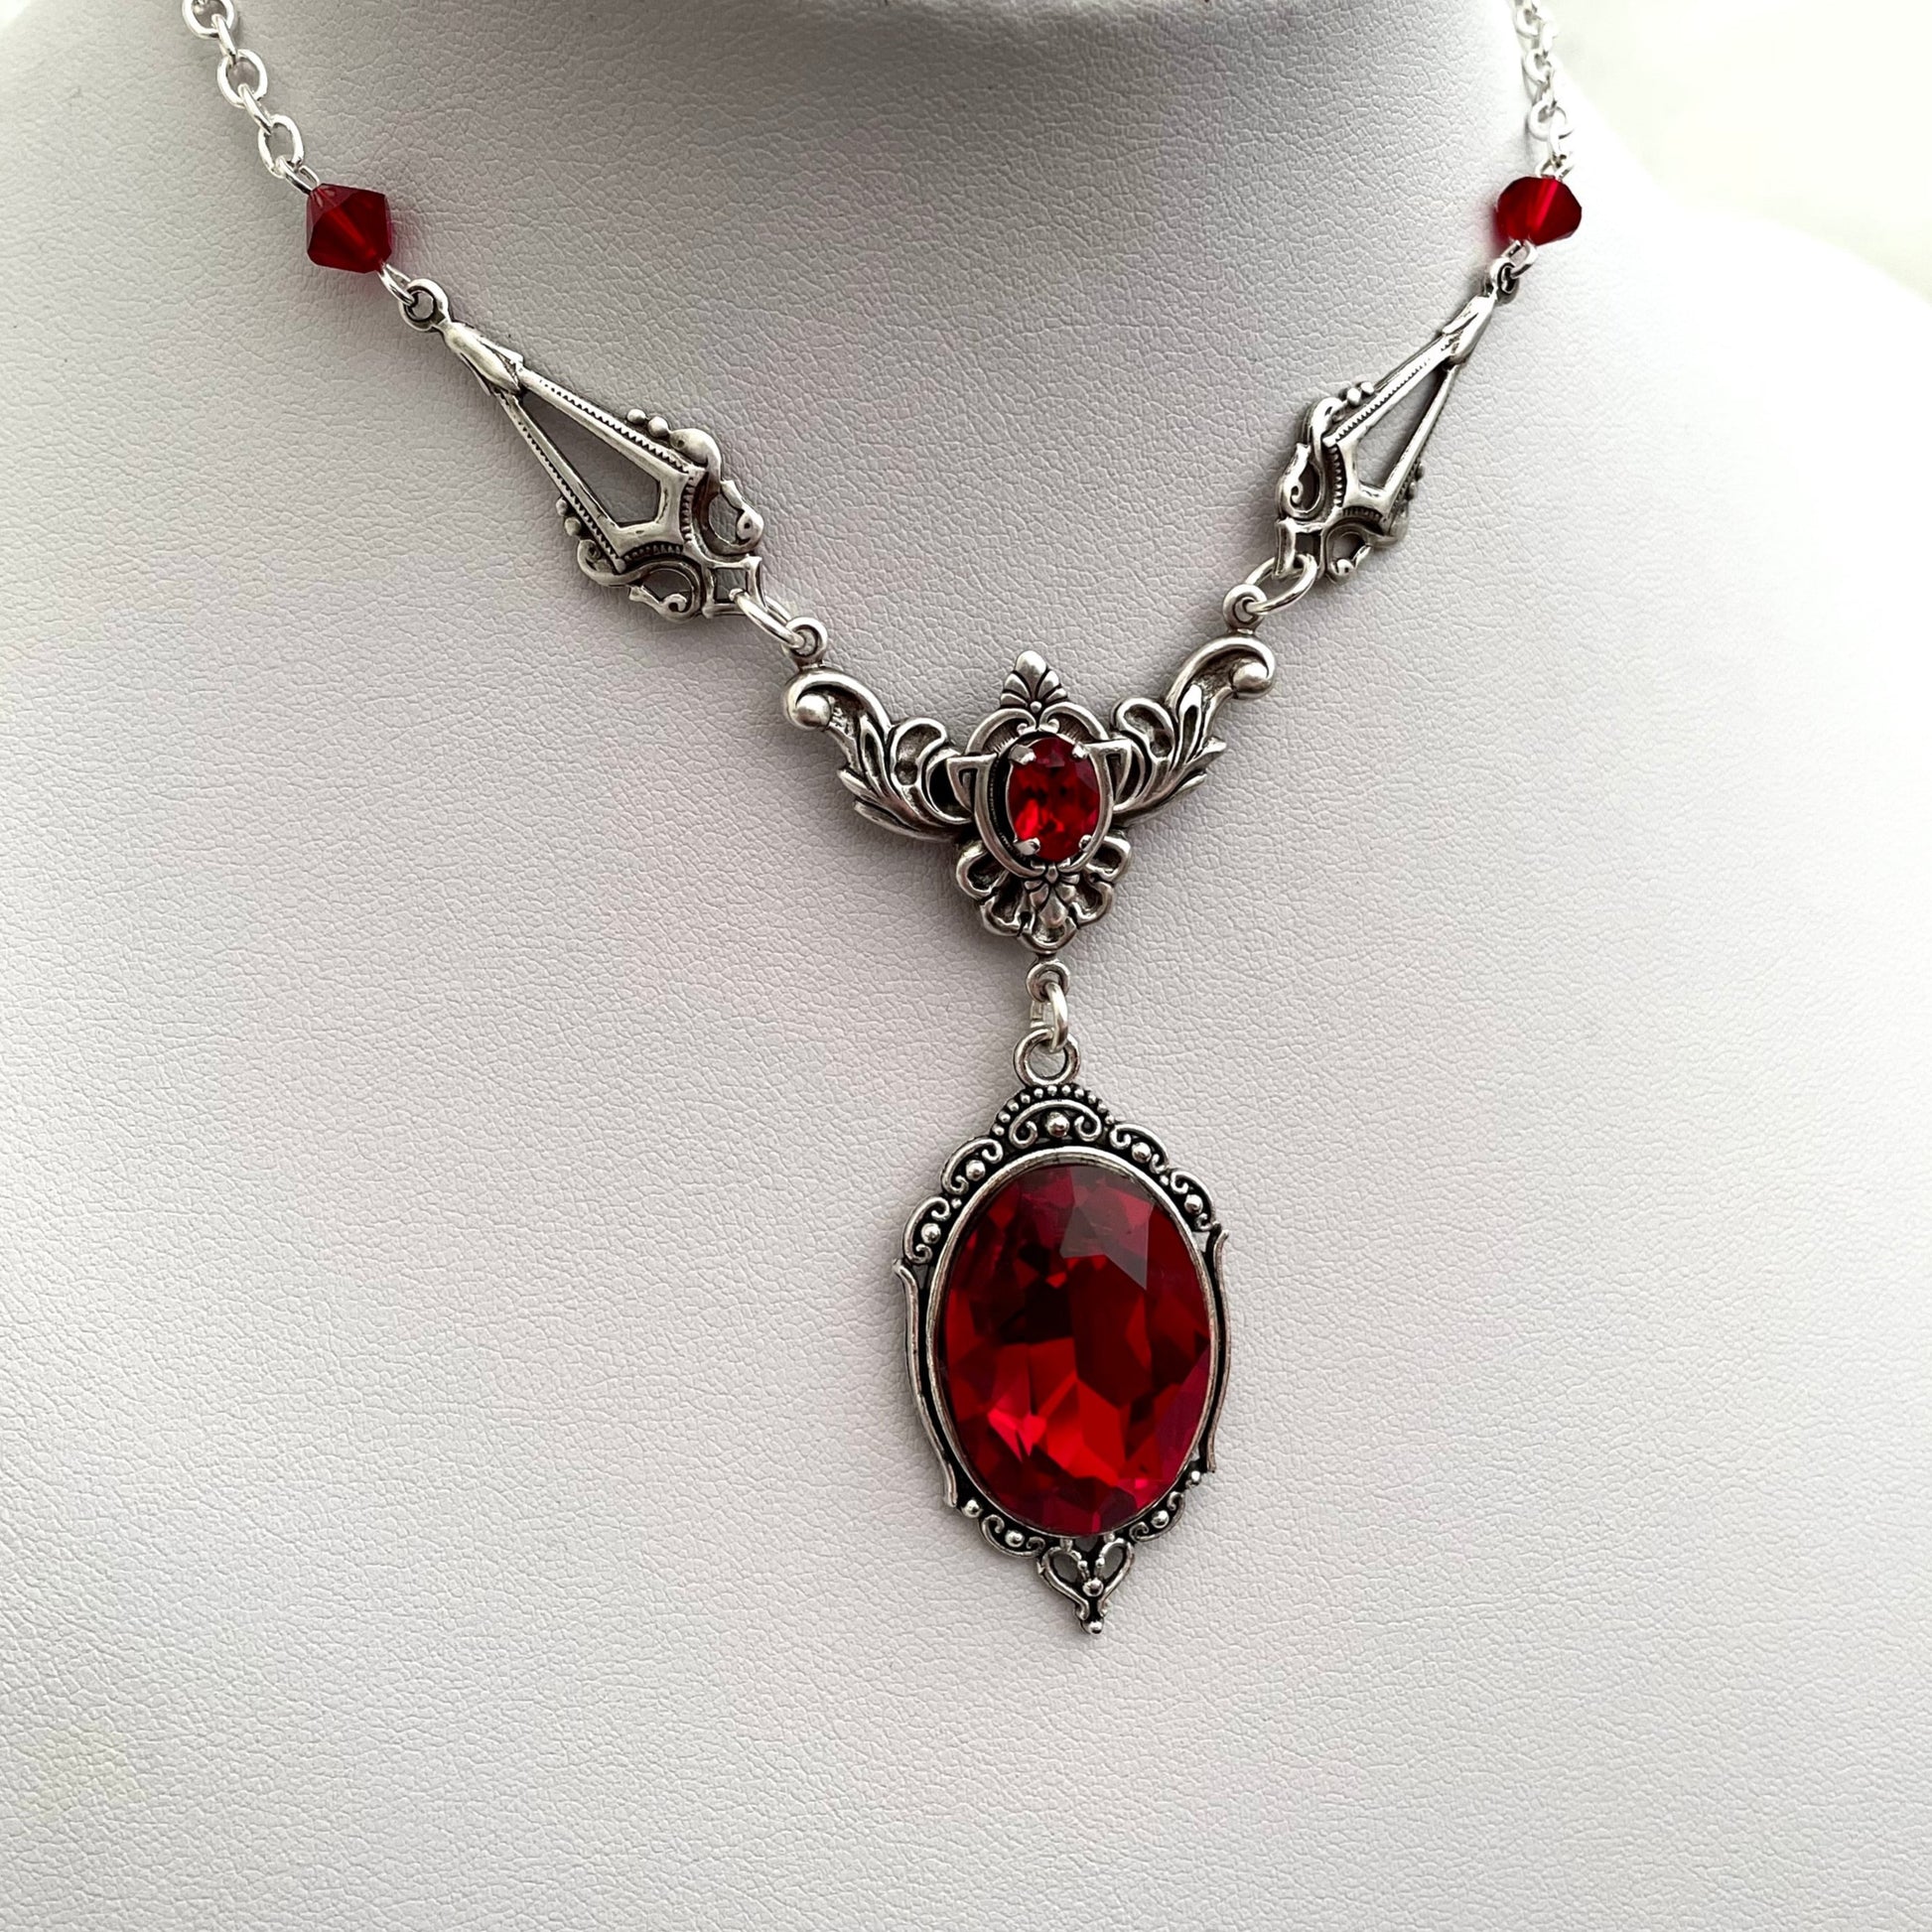 Gothic drop necklace, red drop necklace, necklace with red drops, silver necklace with drops, gothic necklace, goth necklace, goth jewellery, goth jewelry, vampire necklace, vampire choker, vampire drop necklace, blood drop necklace, blood drop choker, bl